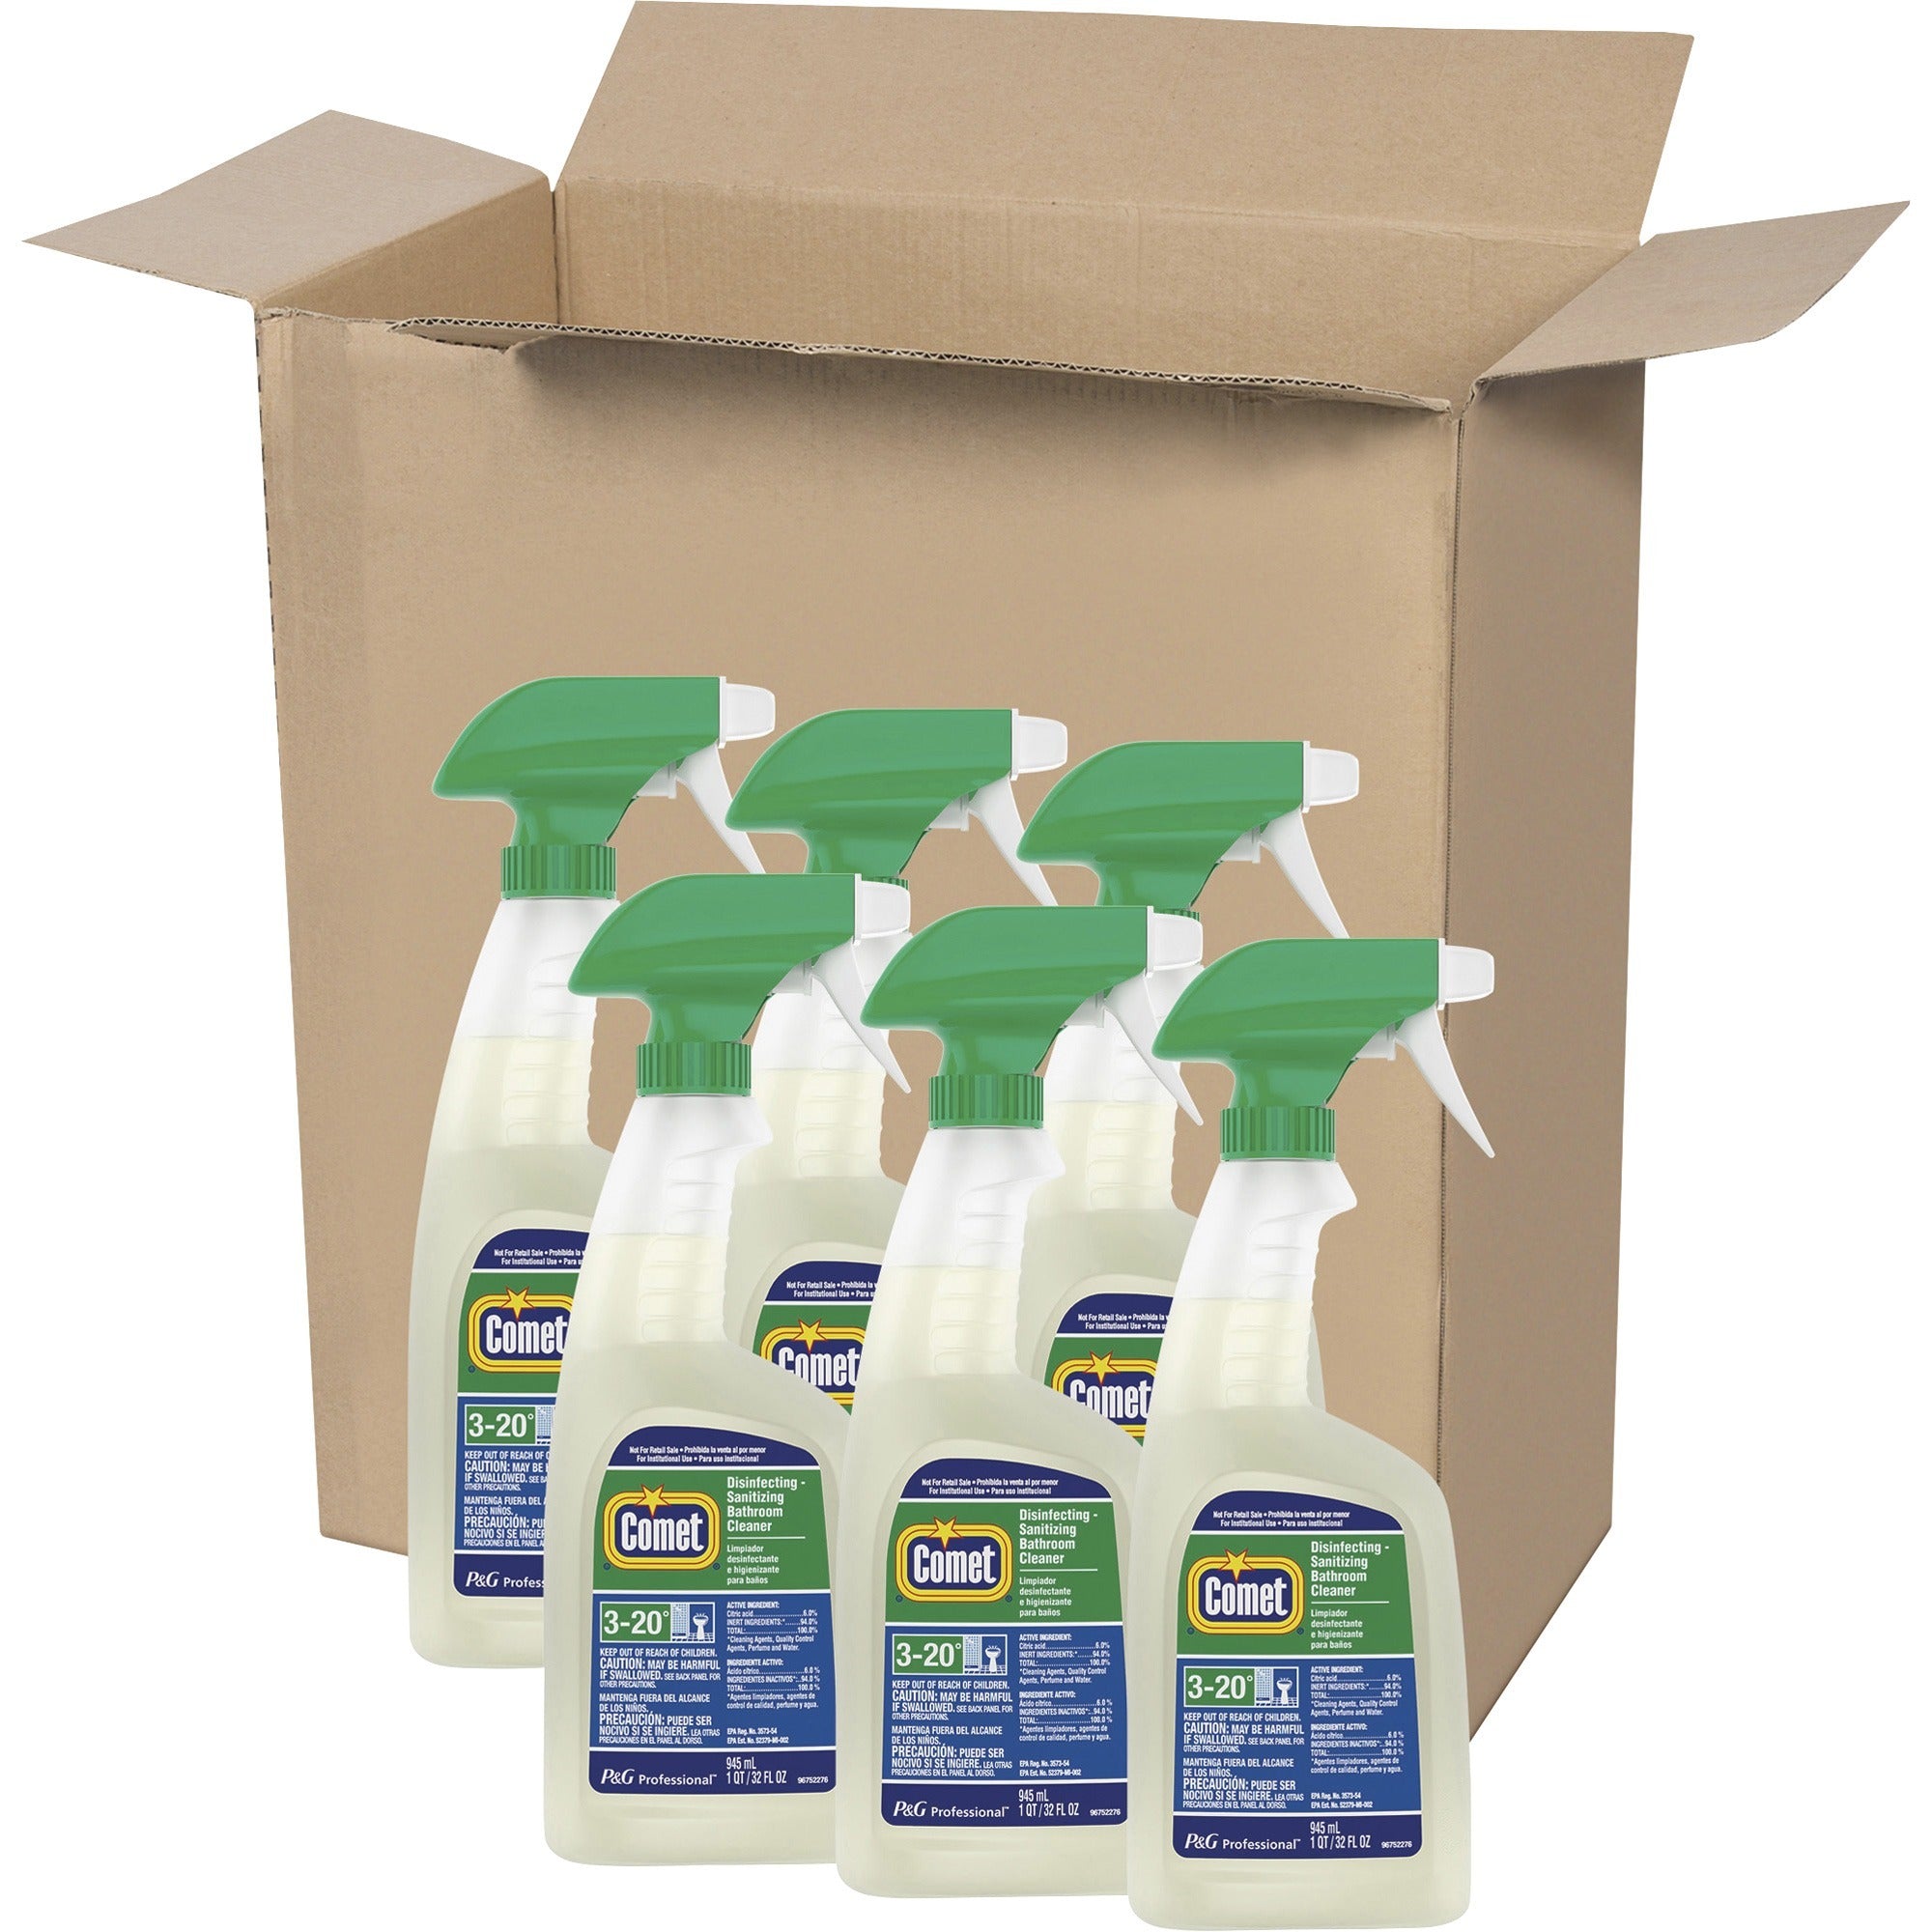 comet-disinfecting-bath-cleaner-ready-to-use-32-fl-oz-1-quart-citrus-scent-6-carton-disinfectant-scrub-free-non-abrasive-rinse-free-green_pgc19214ct - 1